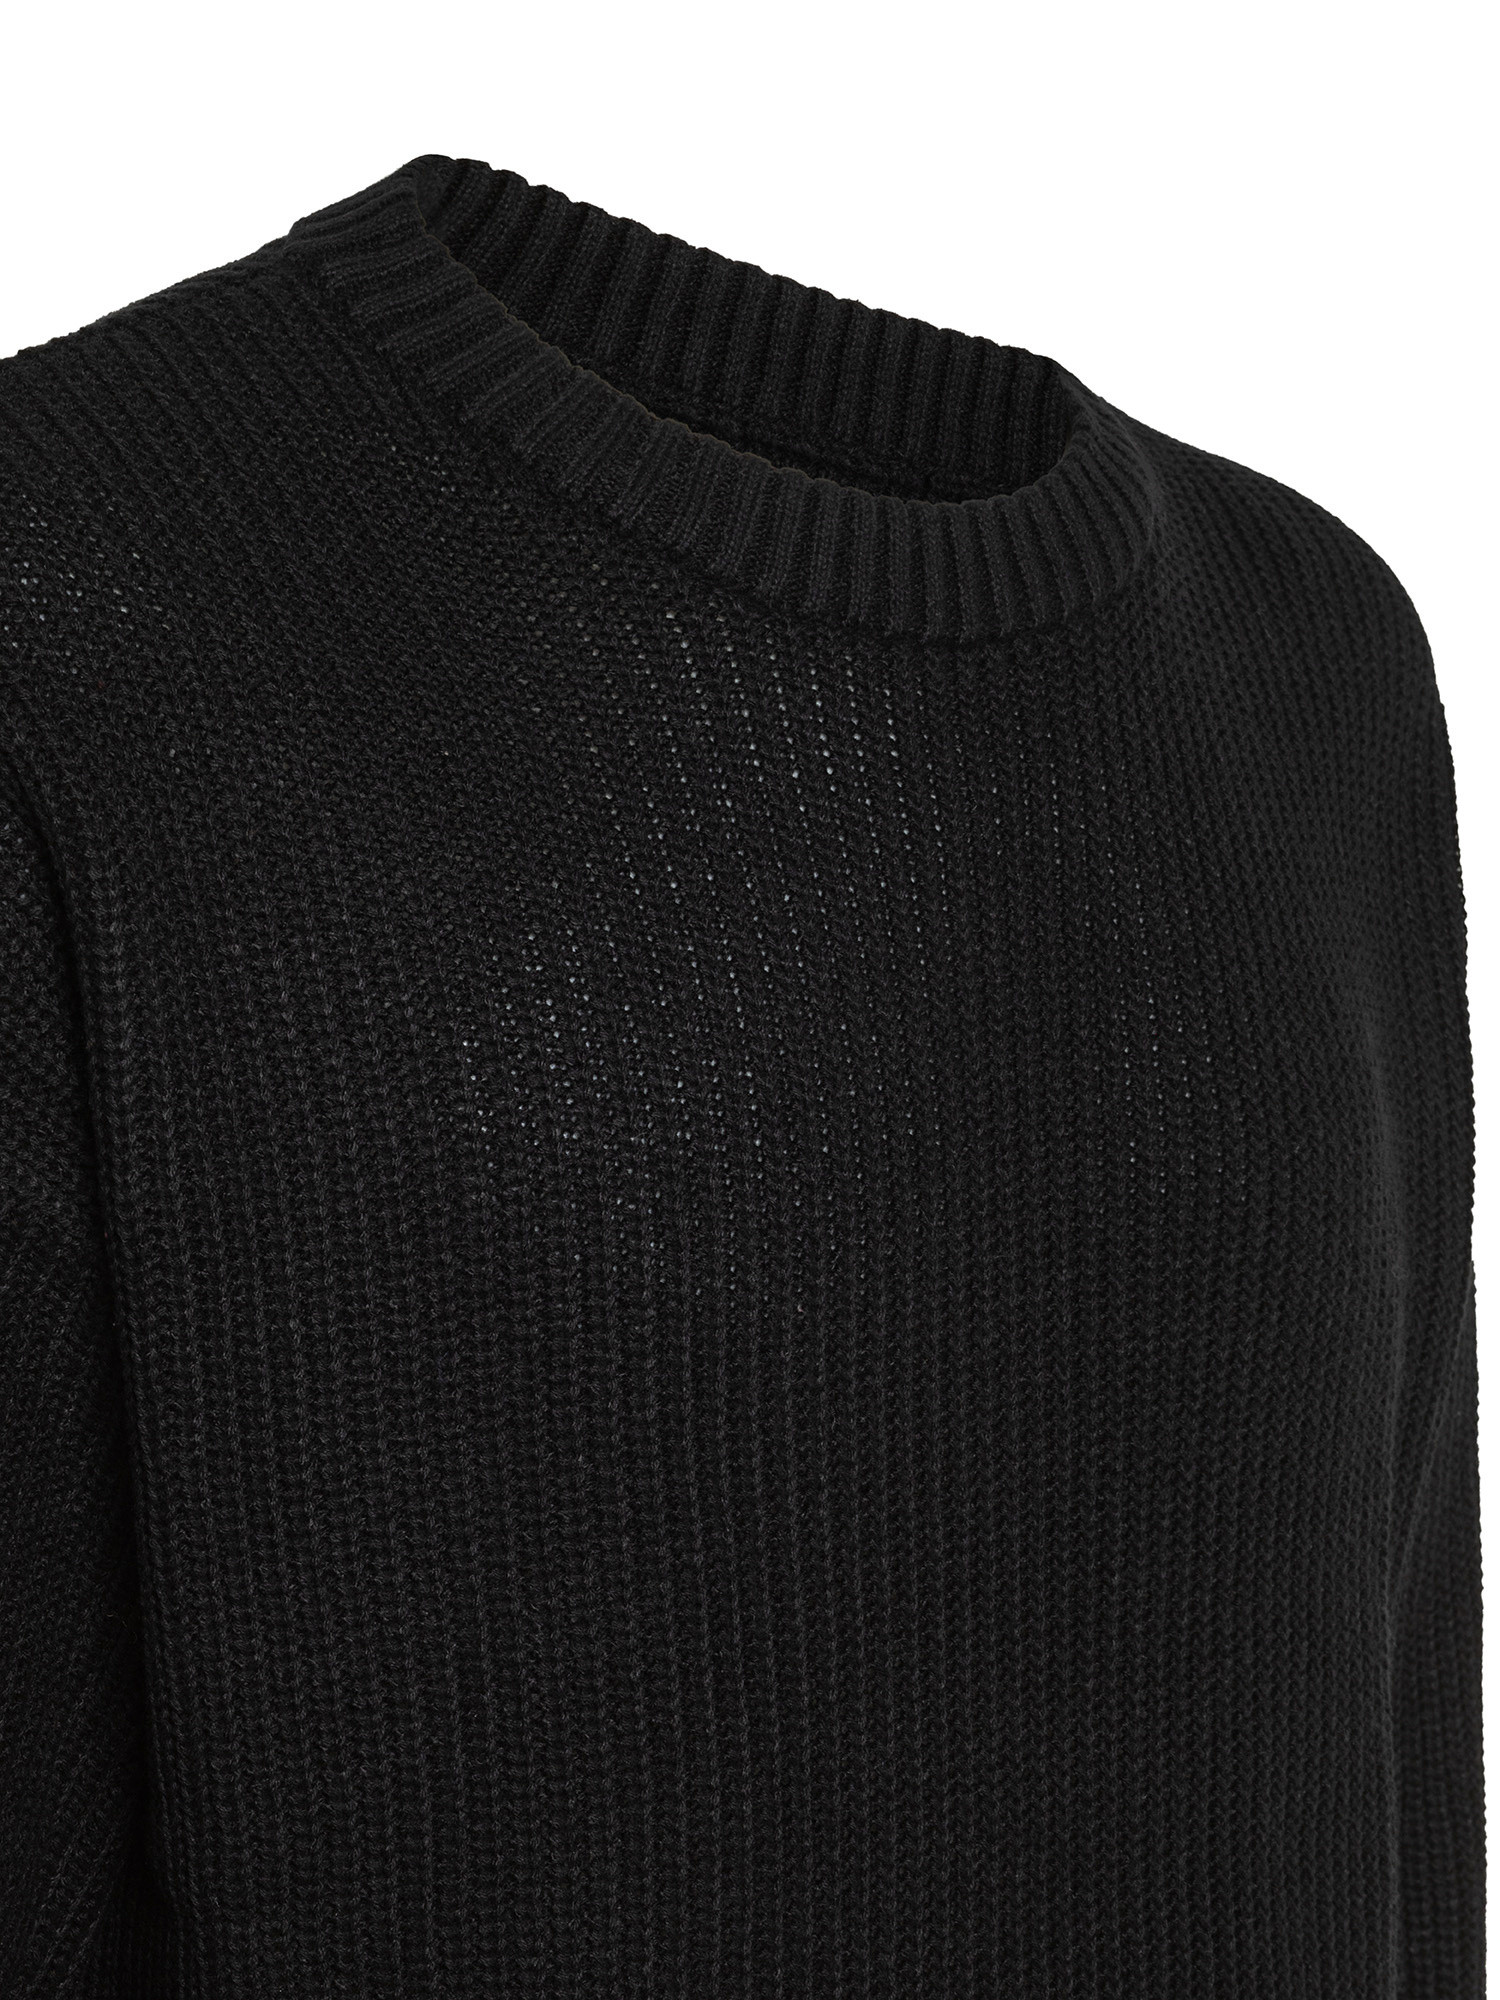 Pullover with long sleeves, Black, large image number 2